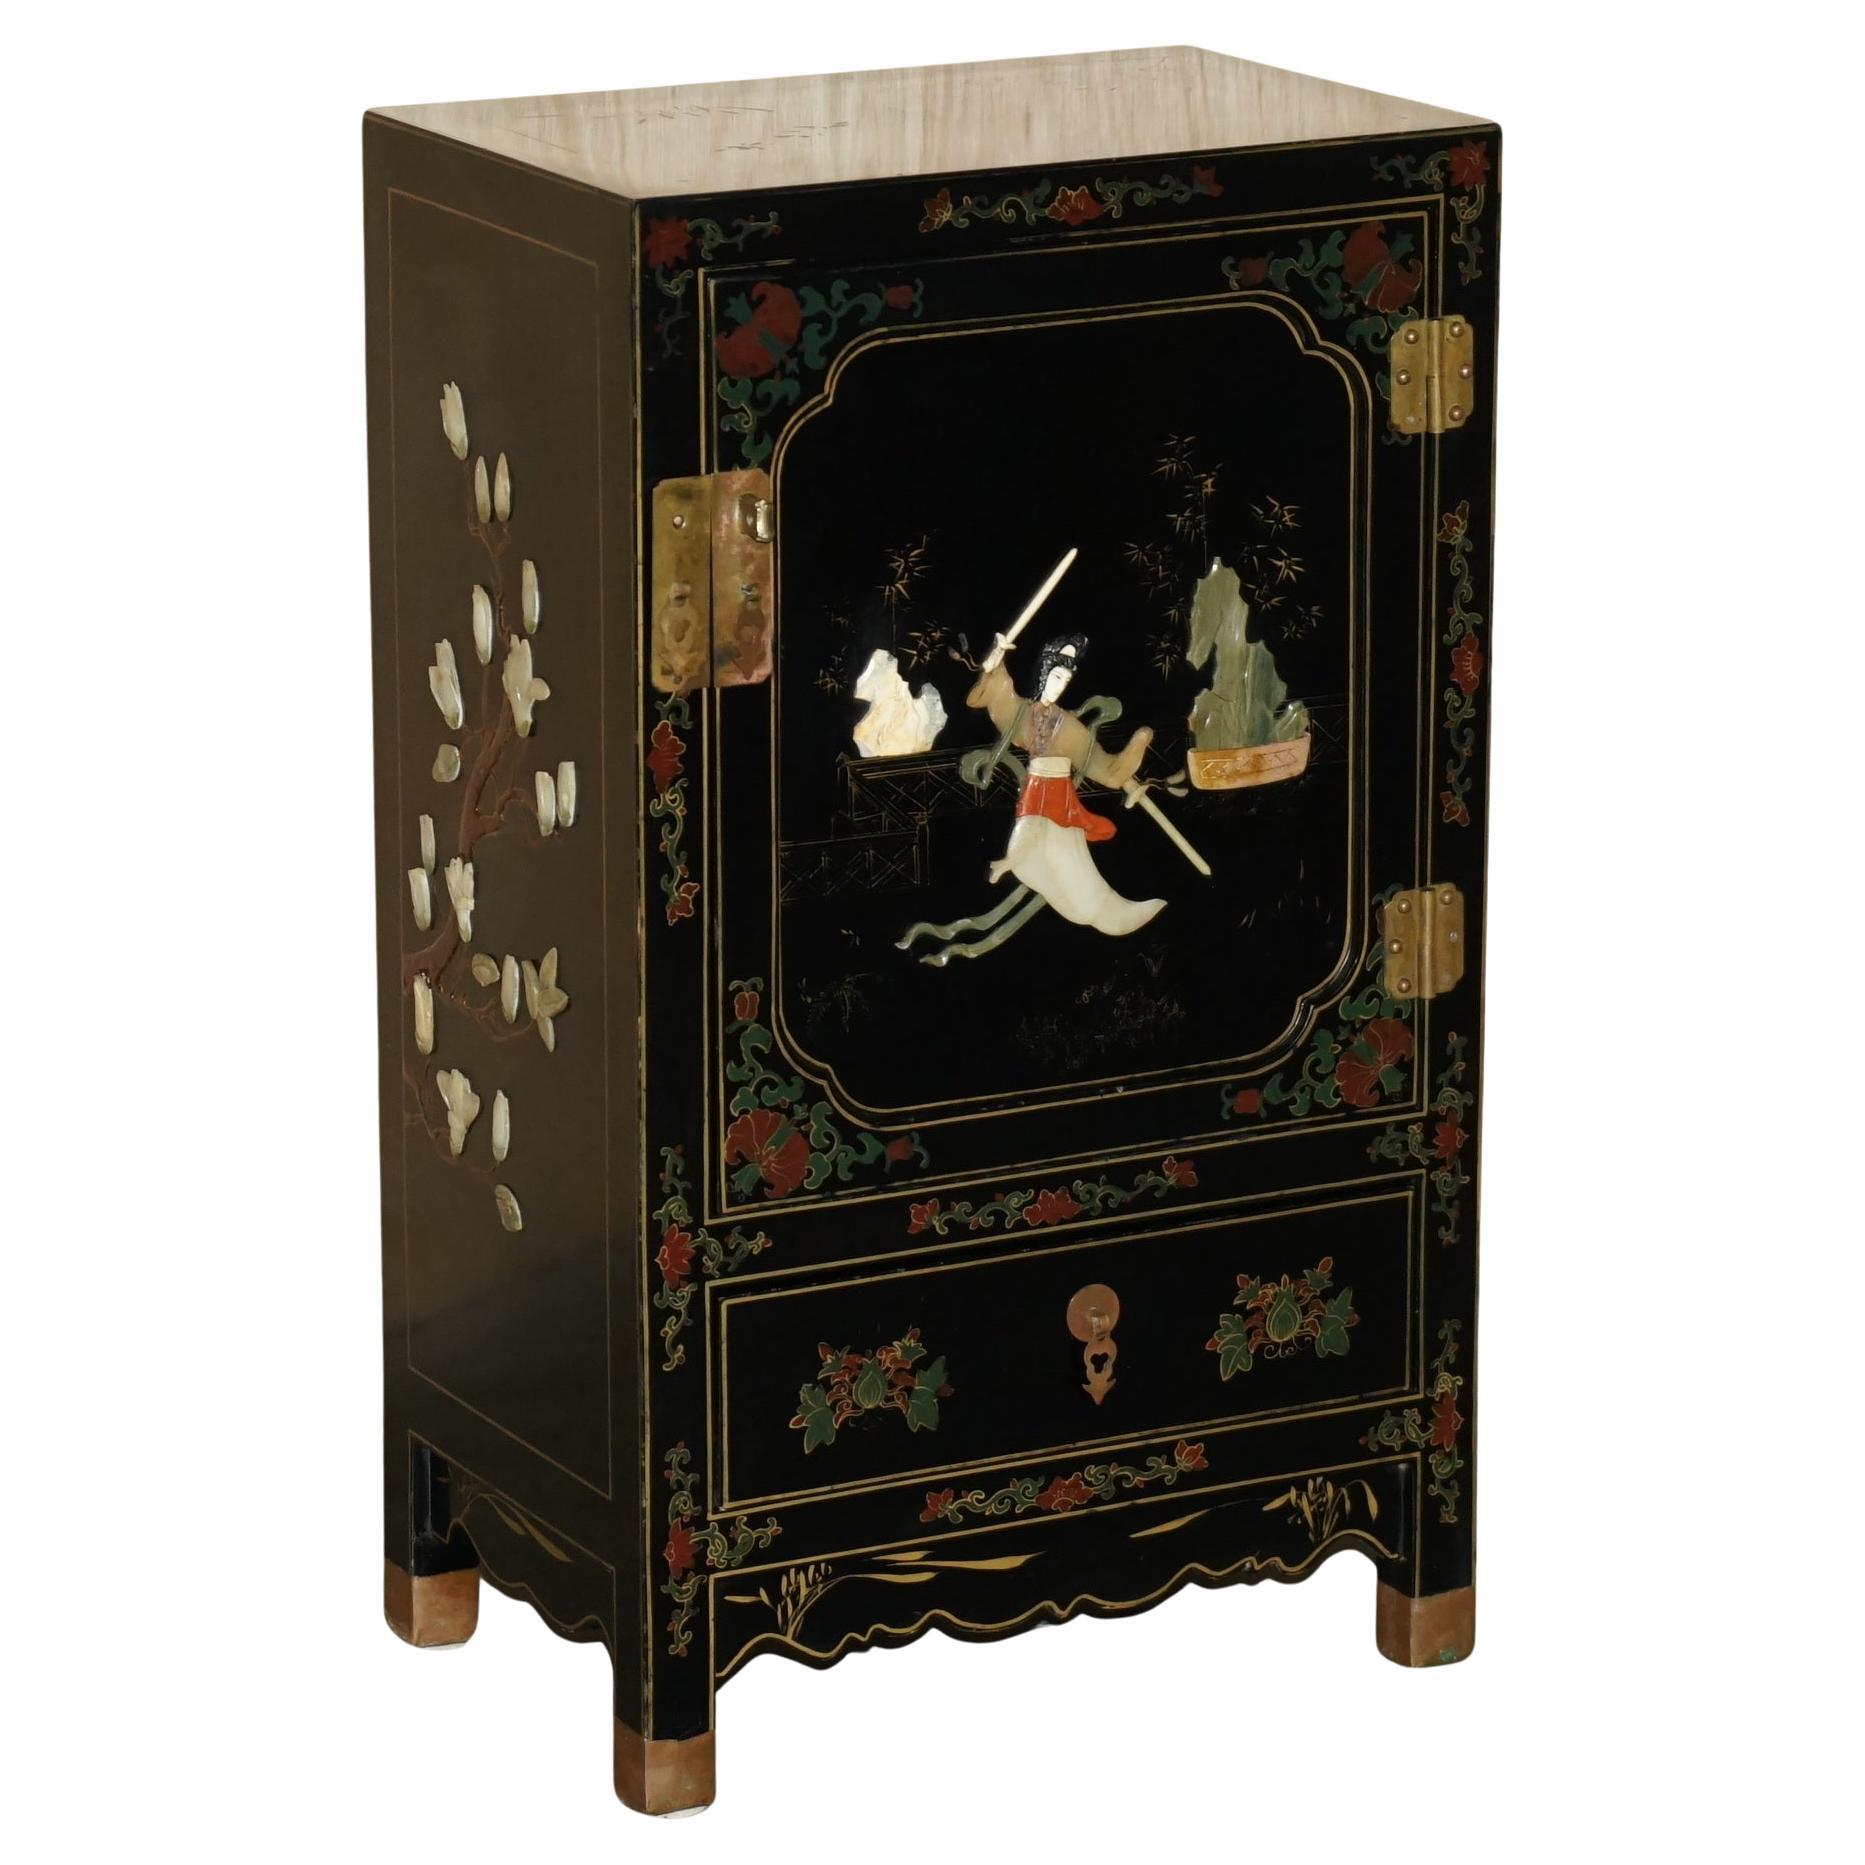 LOVELY ViNTAGE CHINESE CHINOISERIE SAMURAI WARRIOR LACQUER SIDE CABINET SOAPSTON im Angebot